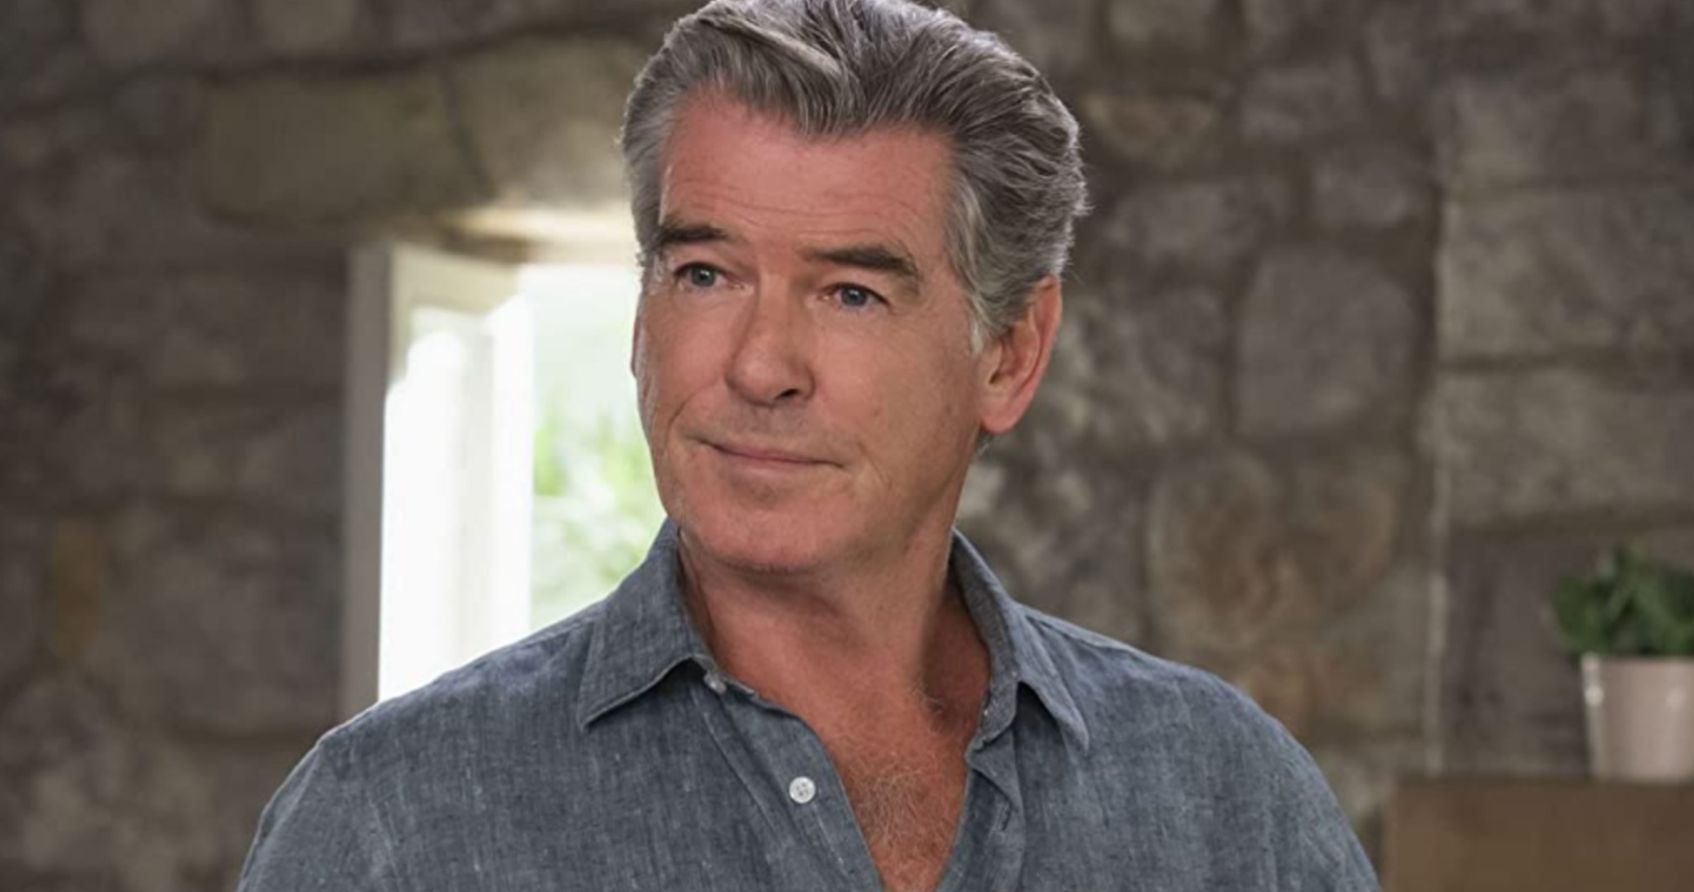 Pierce Brosnan and Adam Devine Team Up for Netflix's Action-Comedy The Out-Laws